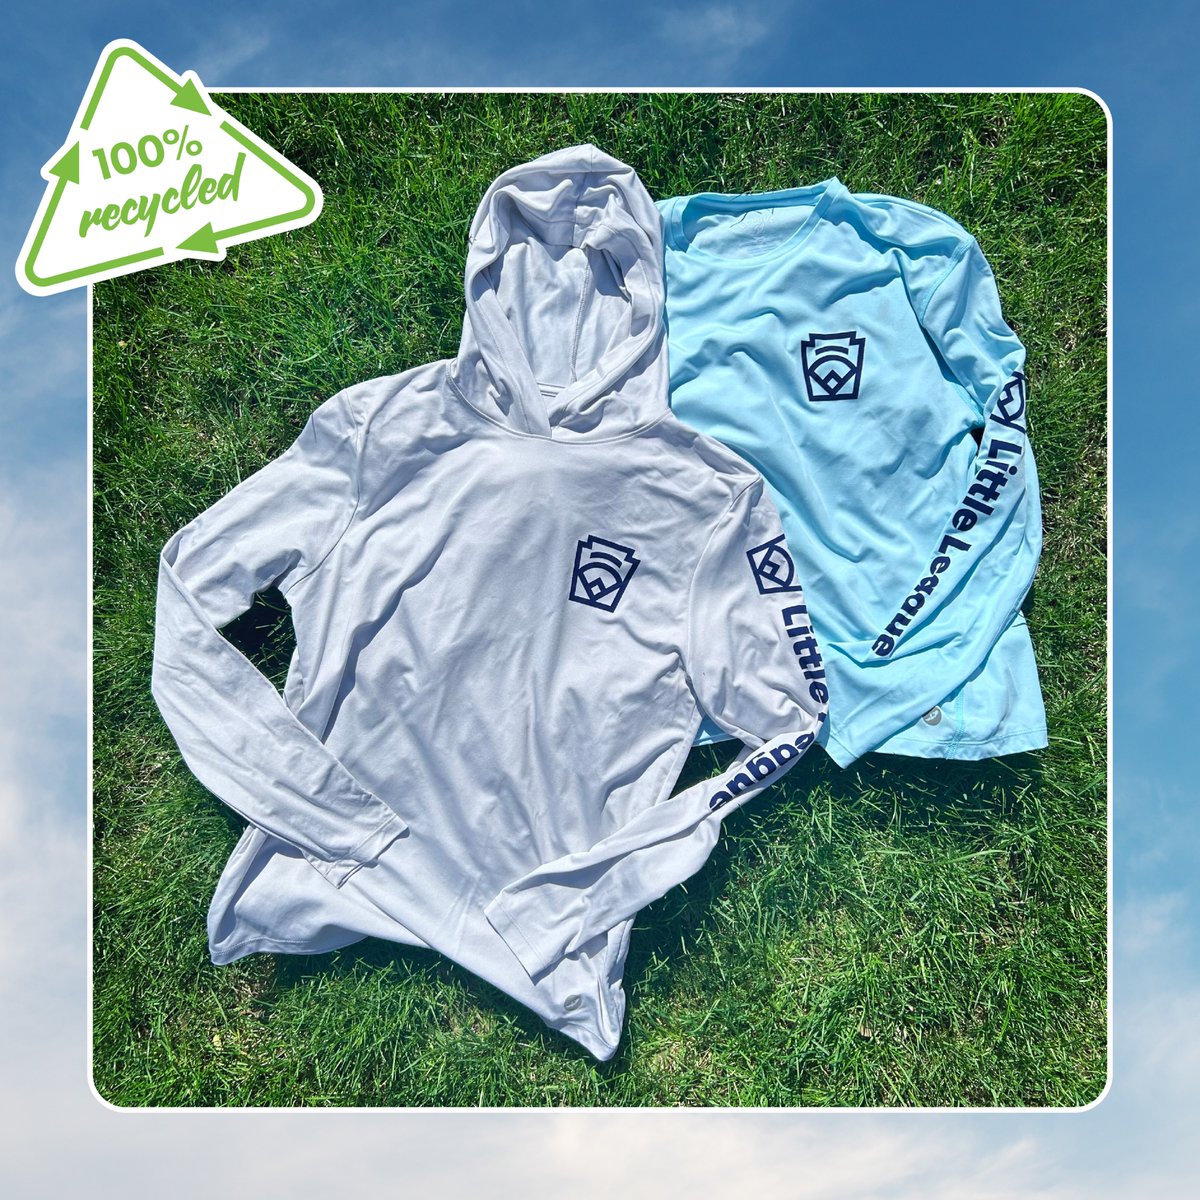 Earth Day was yesterday, but sustainability is important EVERY day! ♻️ Check out our recycled polyester items from the Official Little League Gift Shop at ShopLittleLeague.org